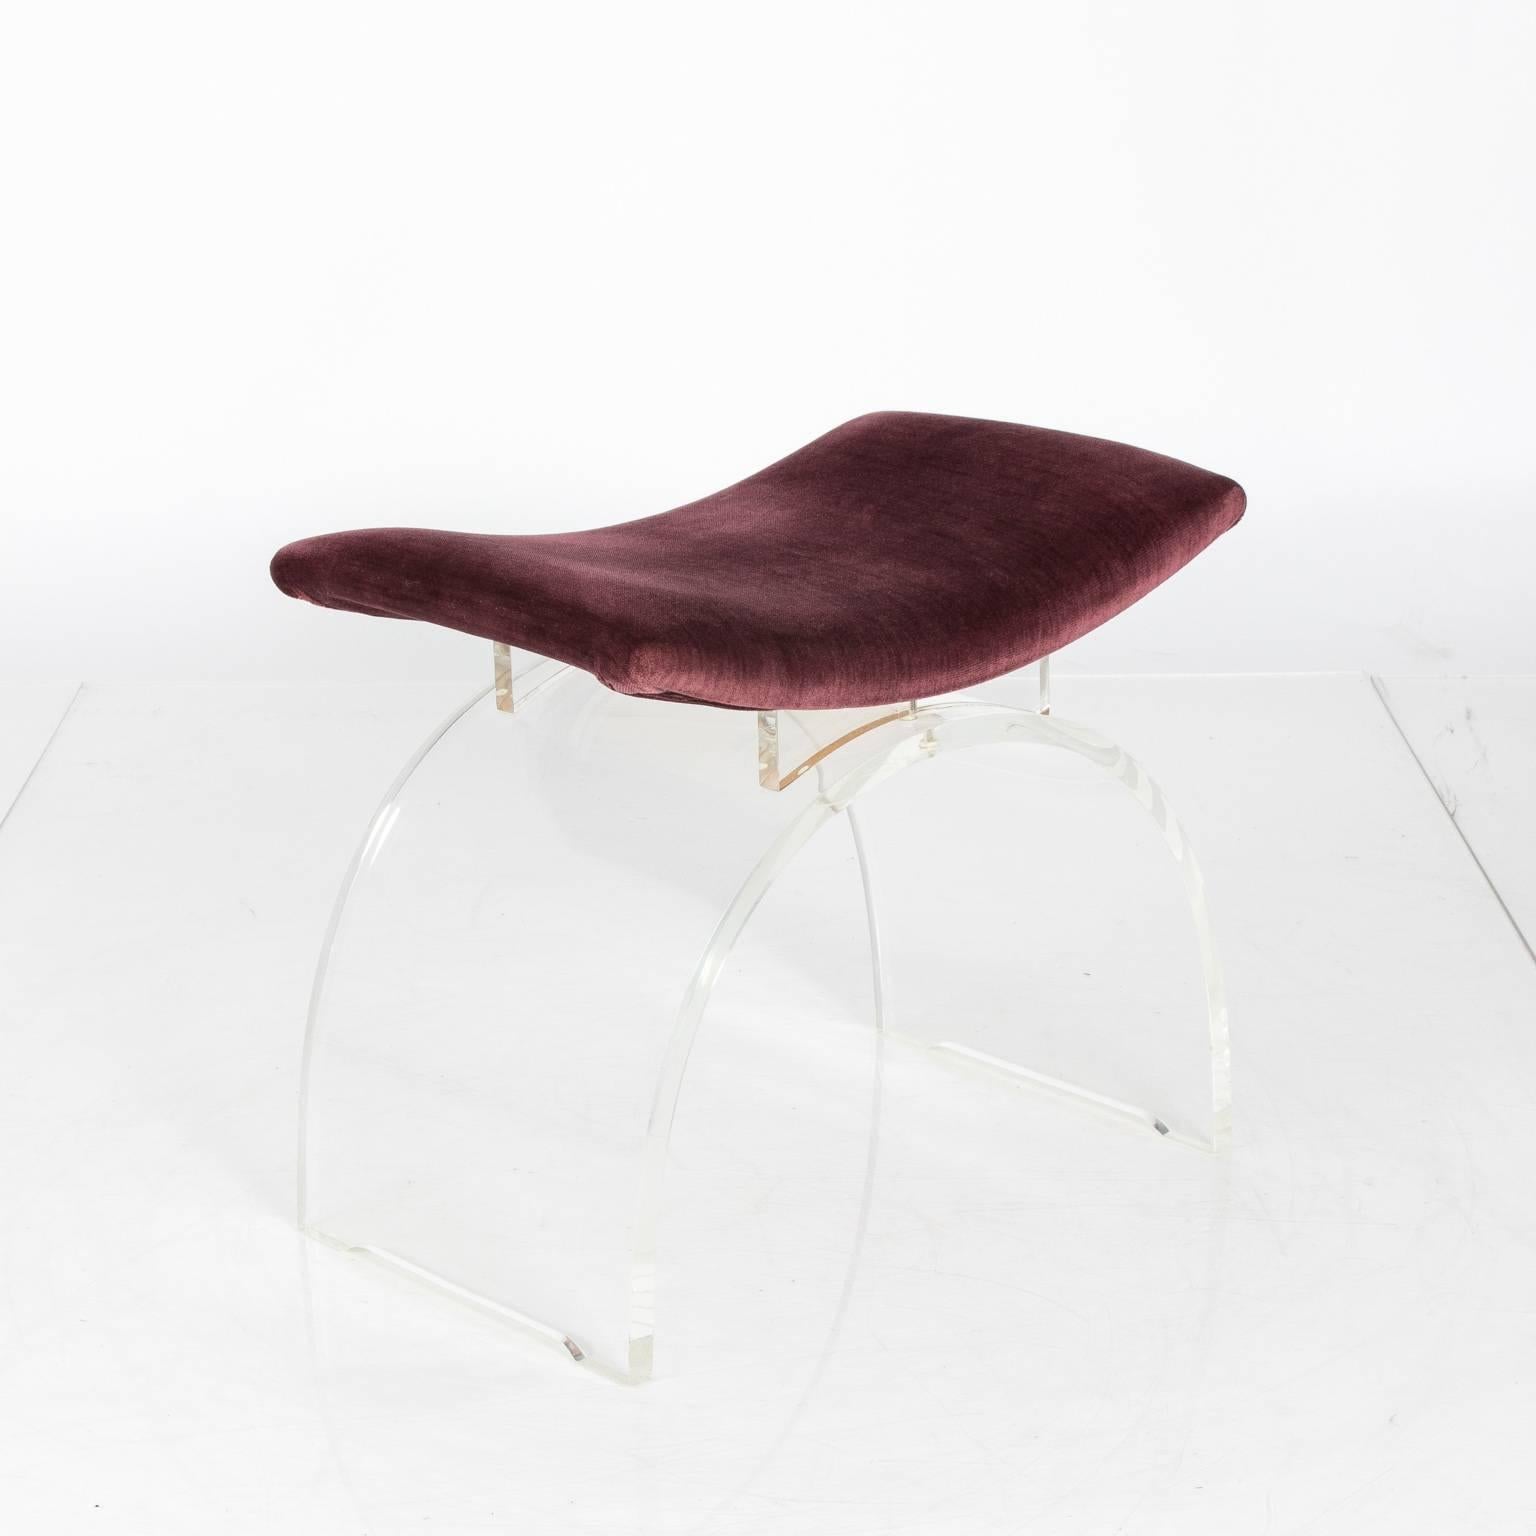 1970s curvy Lucite stool with upholstered seat.
 